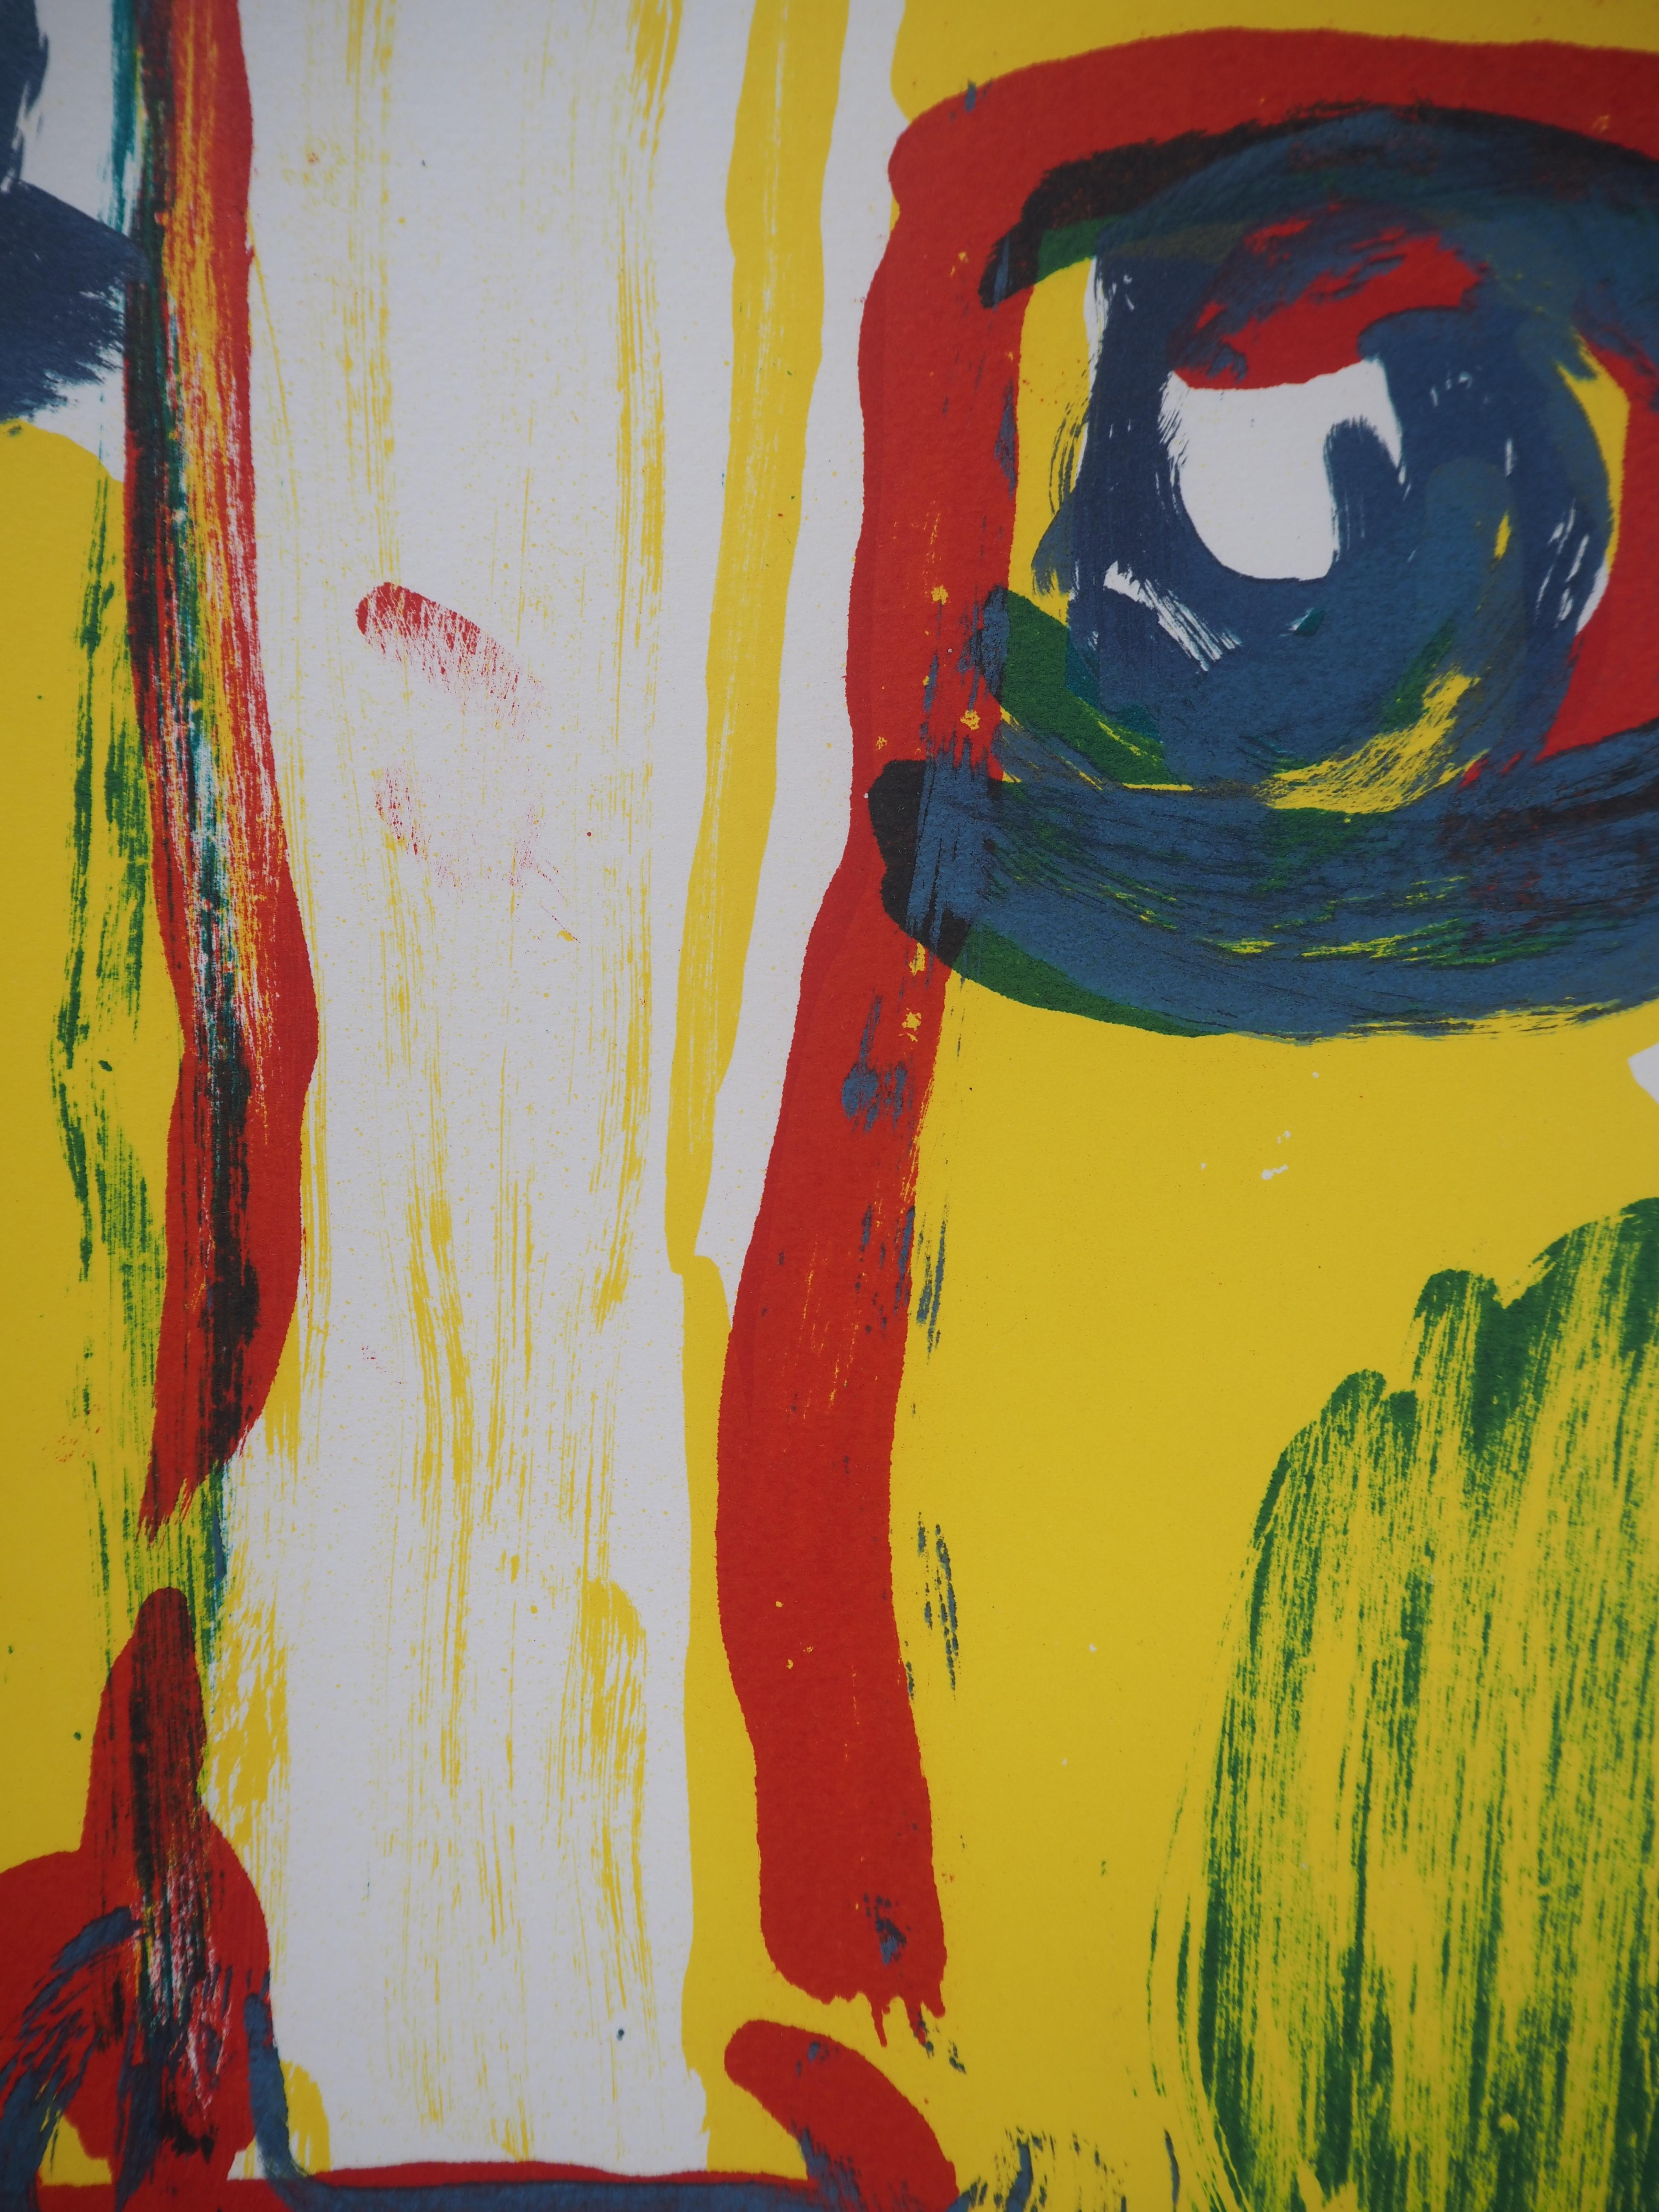 Totem Portrait in Yellow - Original lithograph - Expressionist Print by Bengt Lindström